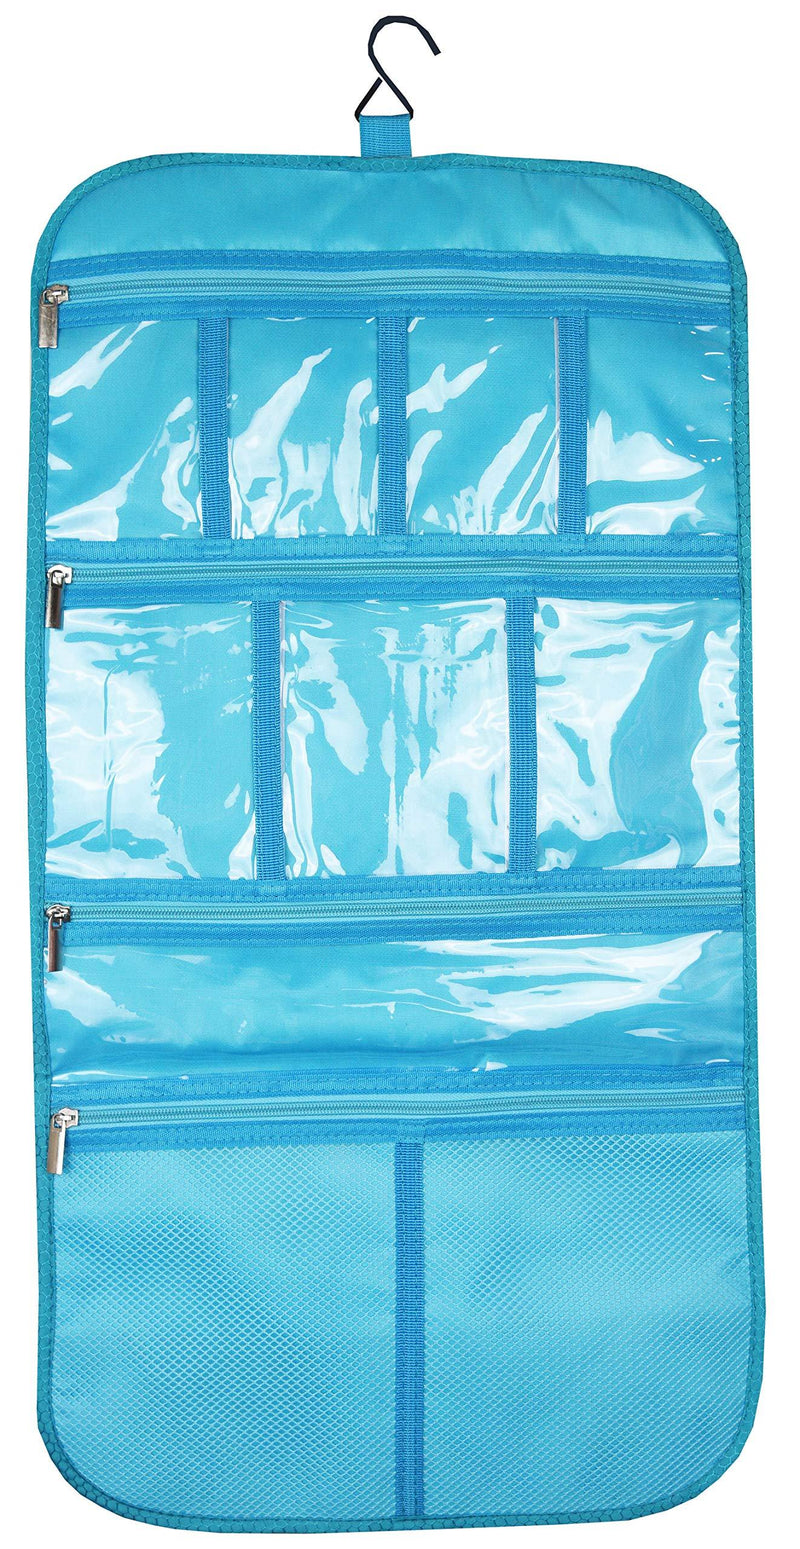 [Australia] - Premium Hanging Toiletry Travel Bag - Cosmetic, Jewelry, Toiletry & Accessory Storage Organizer Bag, Large Size, Various Compartments Aquamarine 